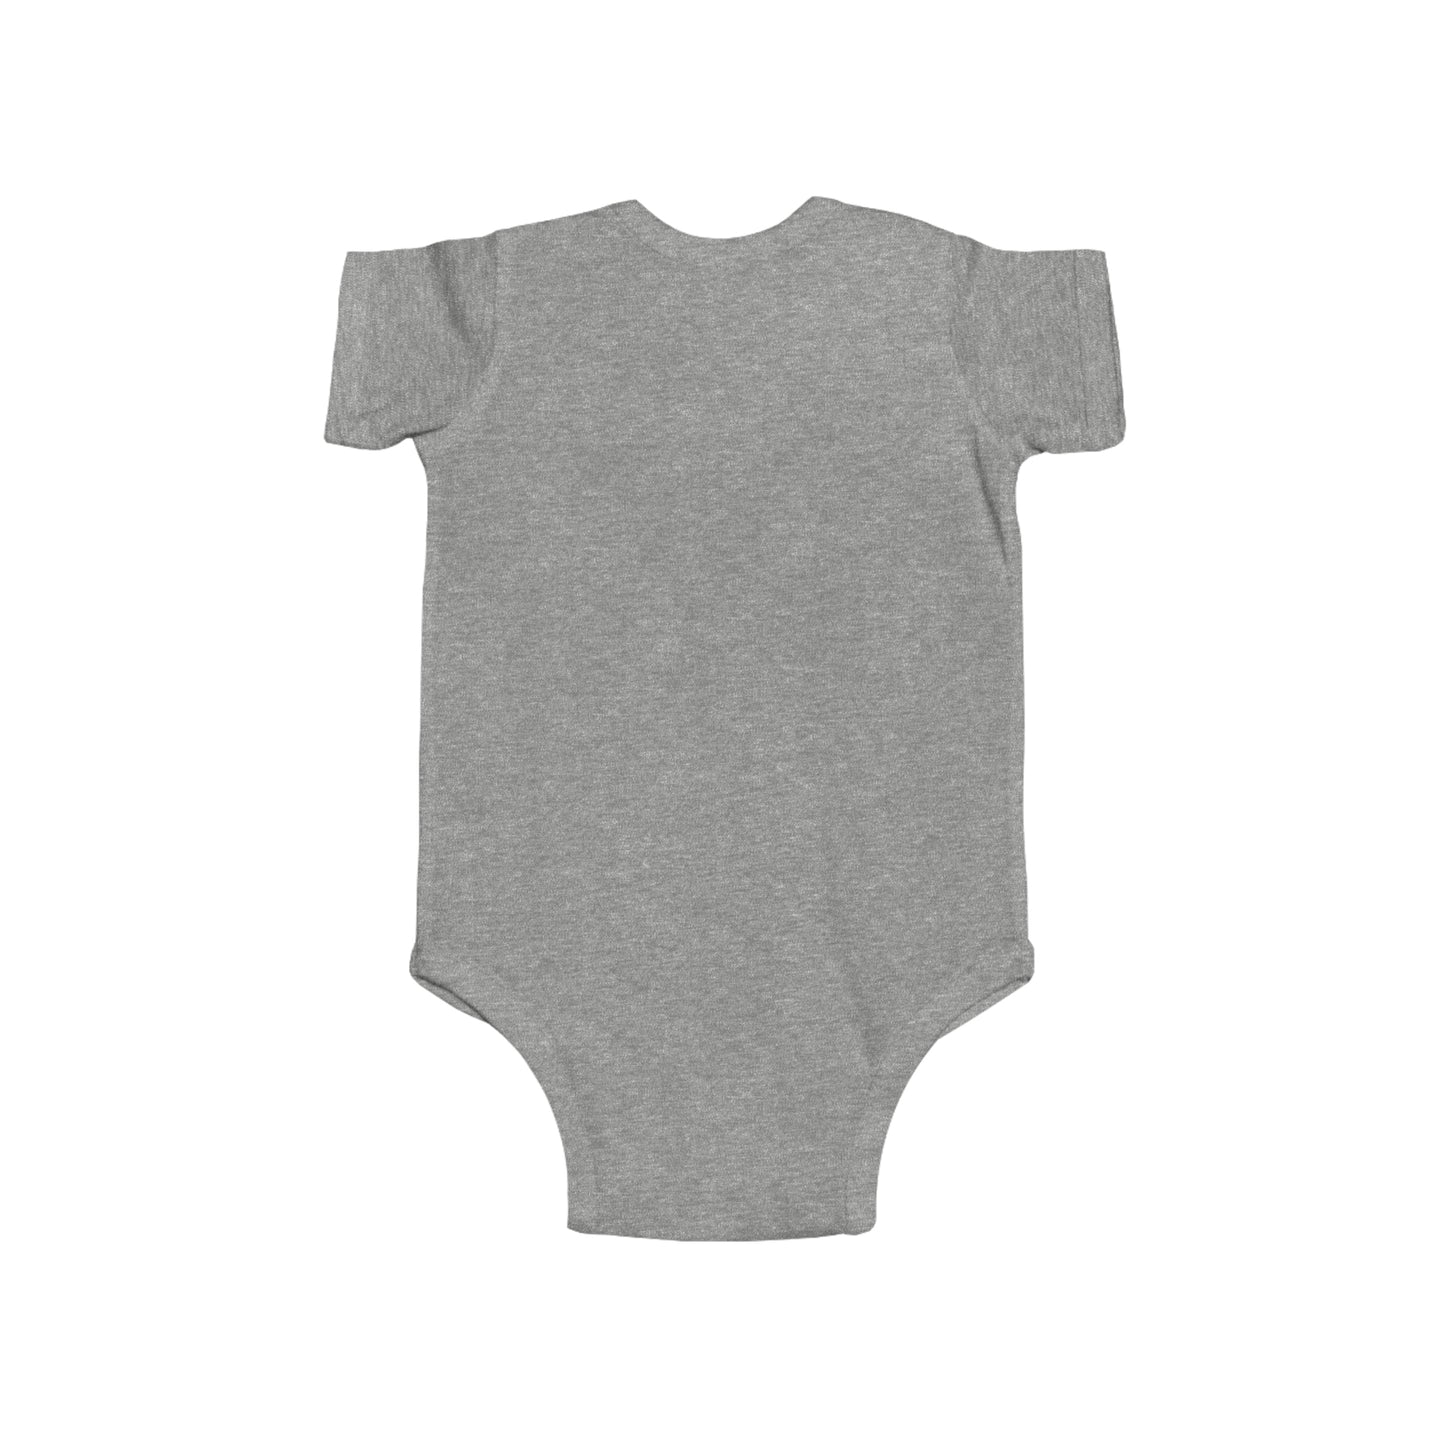 Young Gifted and Gullah Infant Fine Jersey Bodysuit